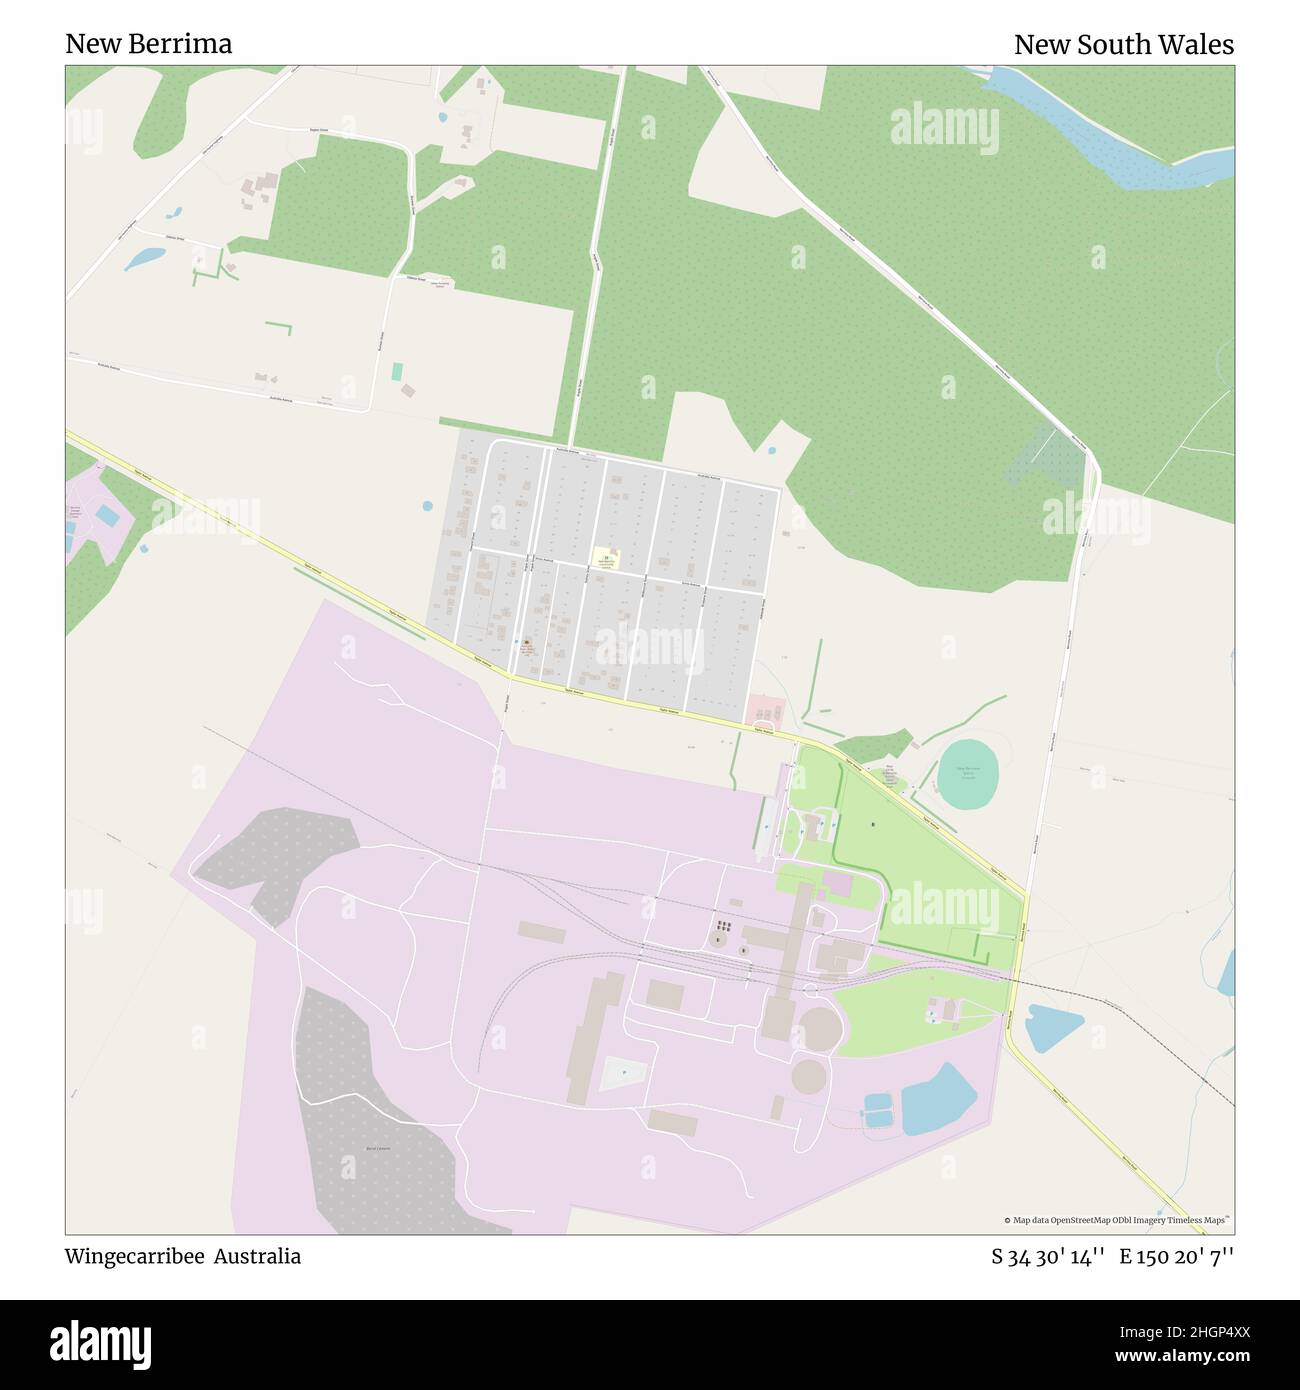 New Berrima, Wingecarribee, Australia, New South Wales, S 34 30' 14'', E 150 20' 7'', map, Timeless Map published in 2021. Travelers, explorers and adventurers like Florence Nightingale, David Livingstone, Ernest Shackleton, Lewis and Clark and Sherlock Holmes relied on maps to plan travels to the world's most remote corners, Timeless Maps is mapping most locations on the globe, showing the achievement of great dreams Stock Photo